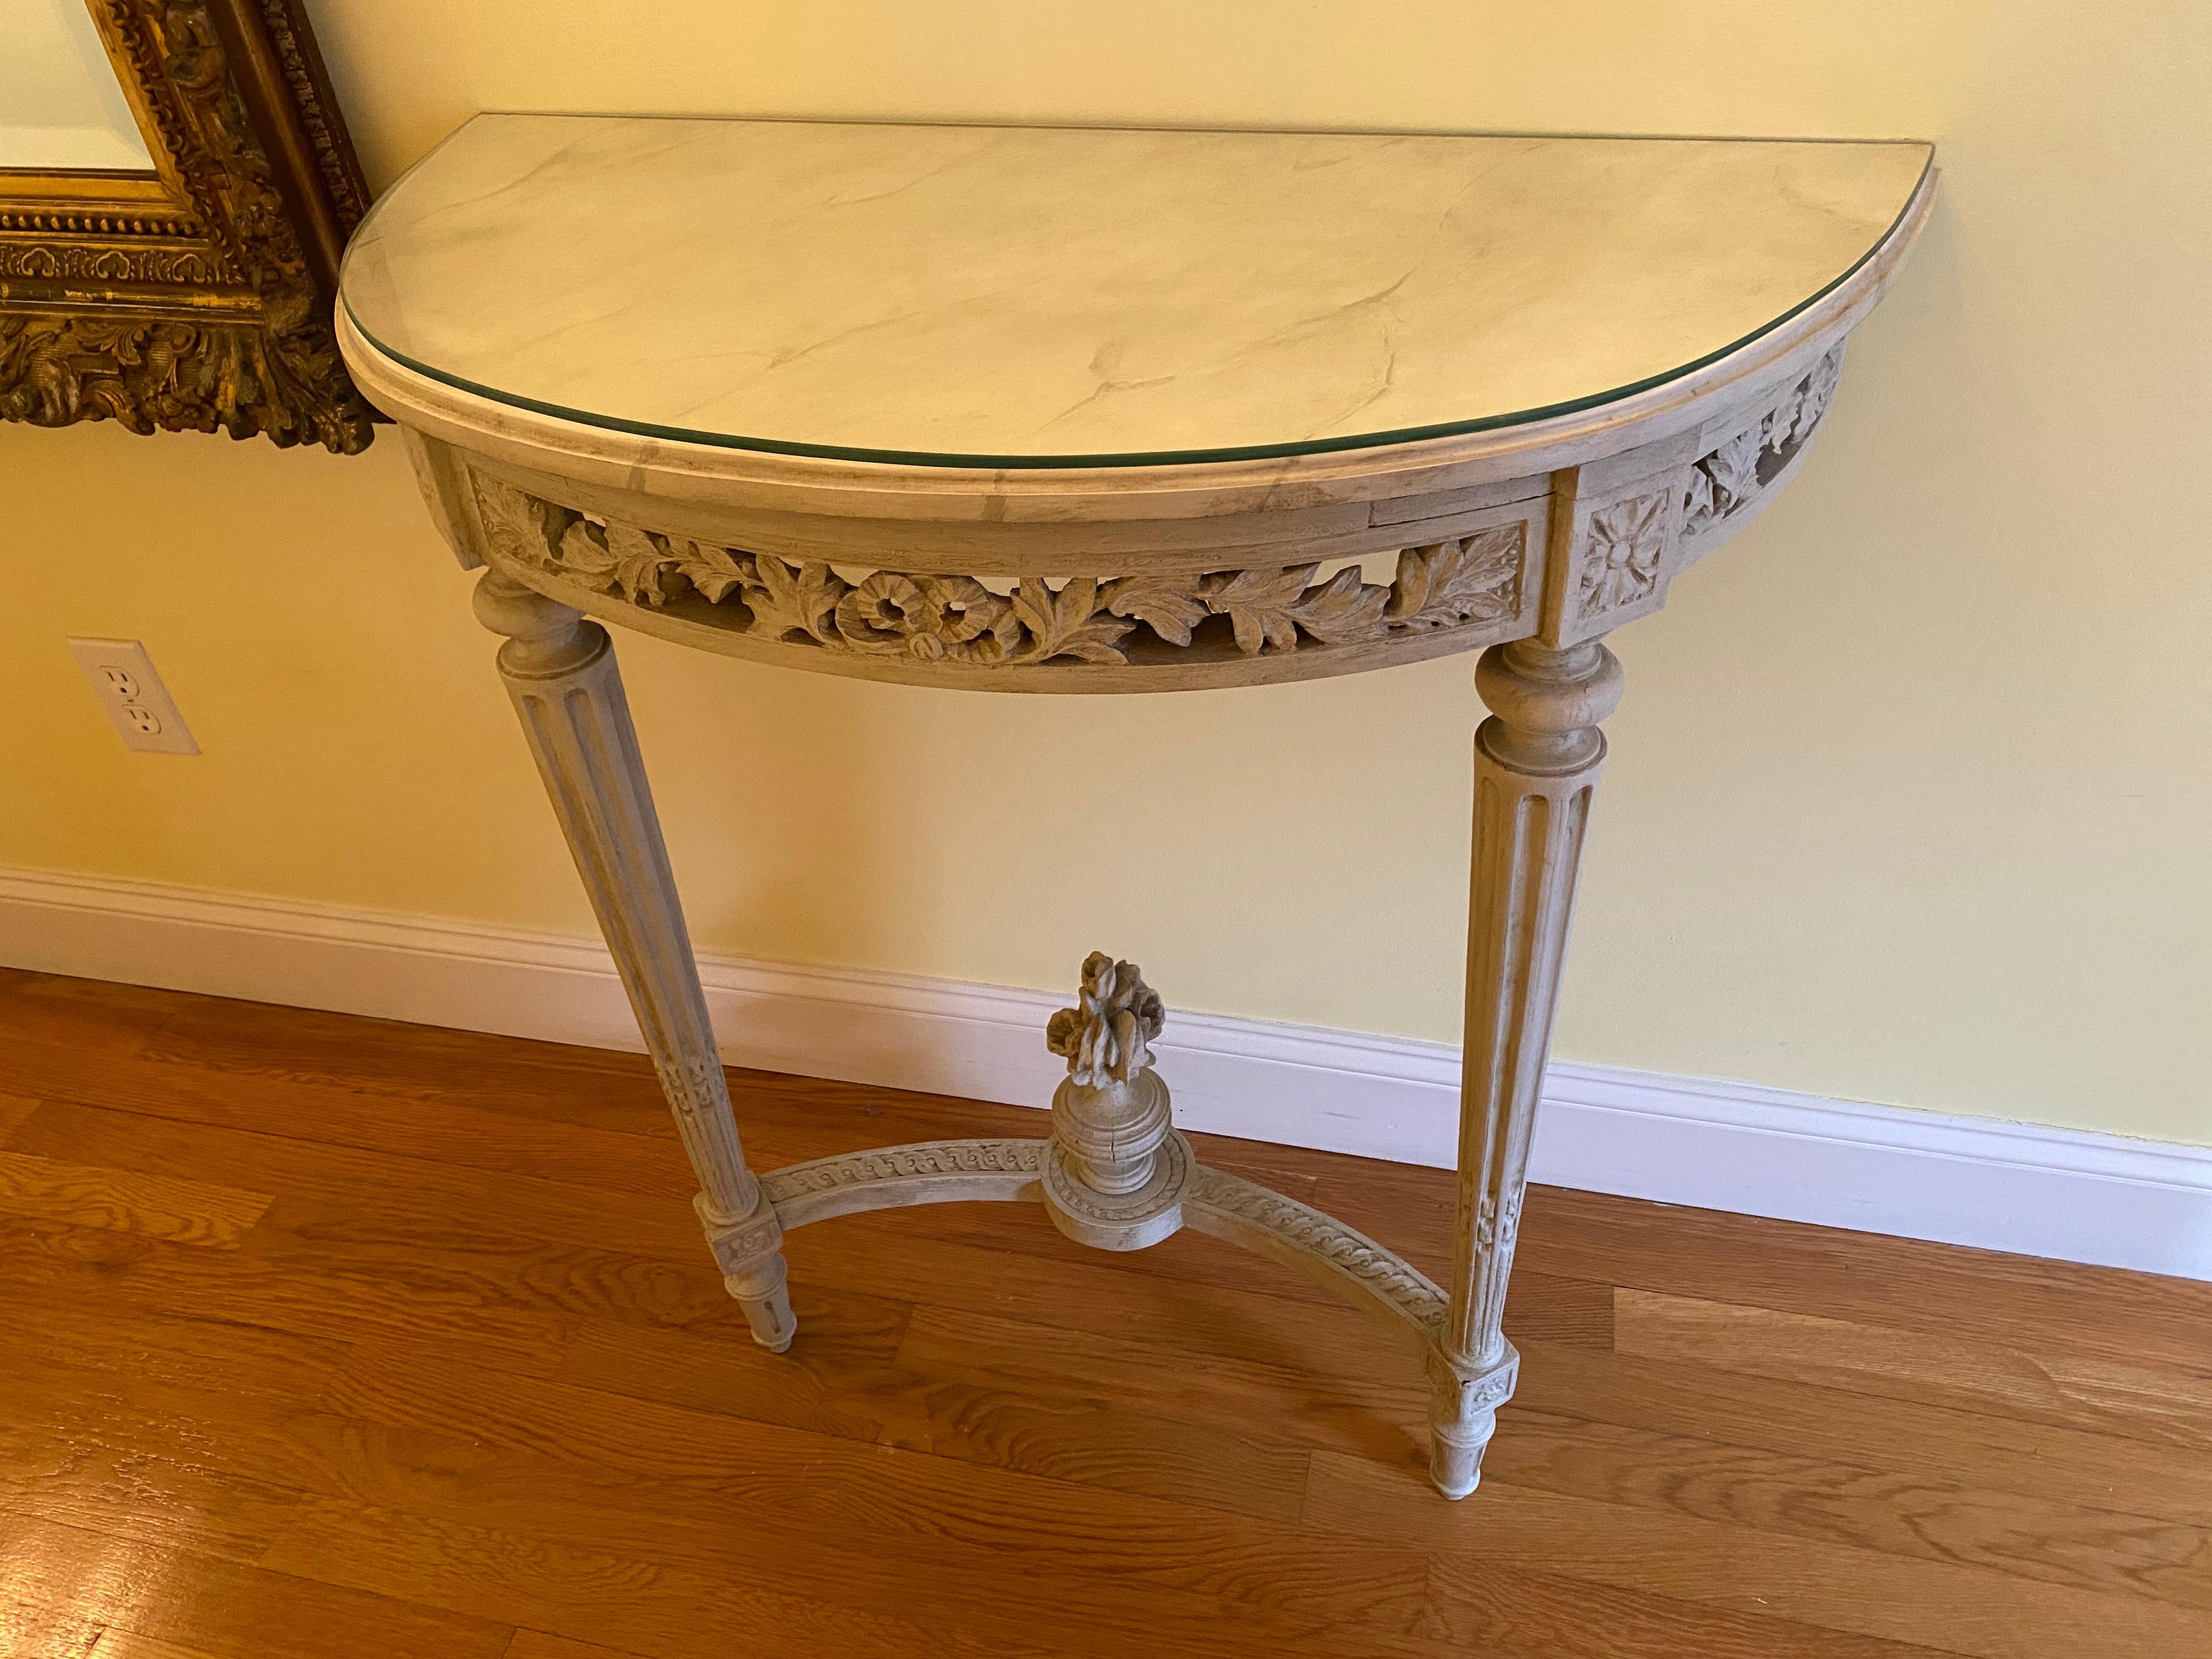 Pair of Louis XVI style painted demi lunes with faux bois marble tops. A lovely pair of diminutive demi-lunes with fine carved details and faux painted marble tops and additional protective glass tops. Base and top made of carved wood, base is